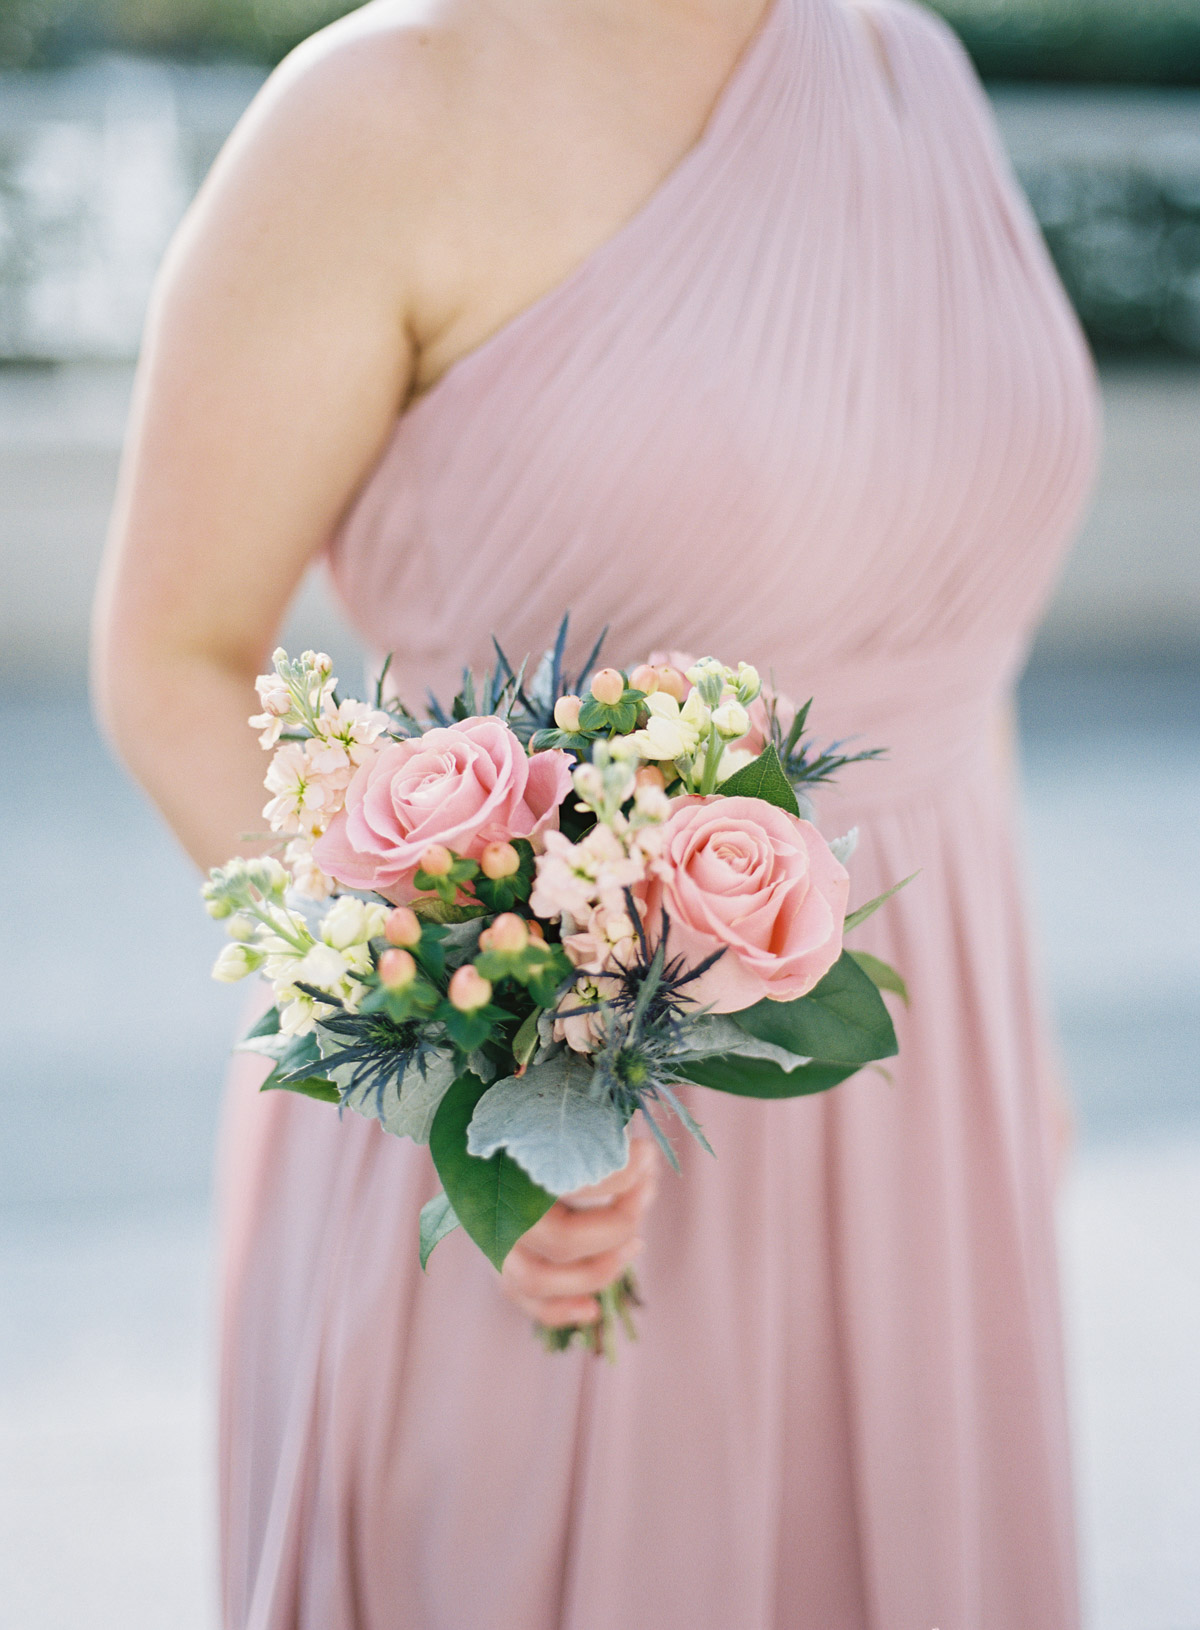 Bridesmaid wearing pink one-shoulder dress posing for photo